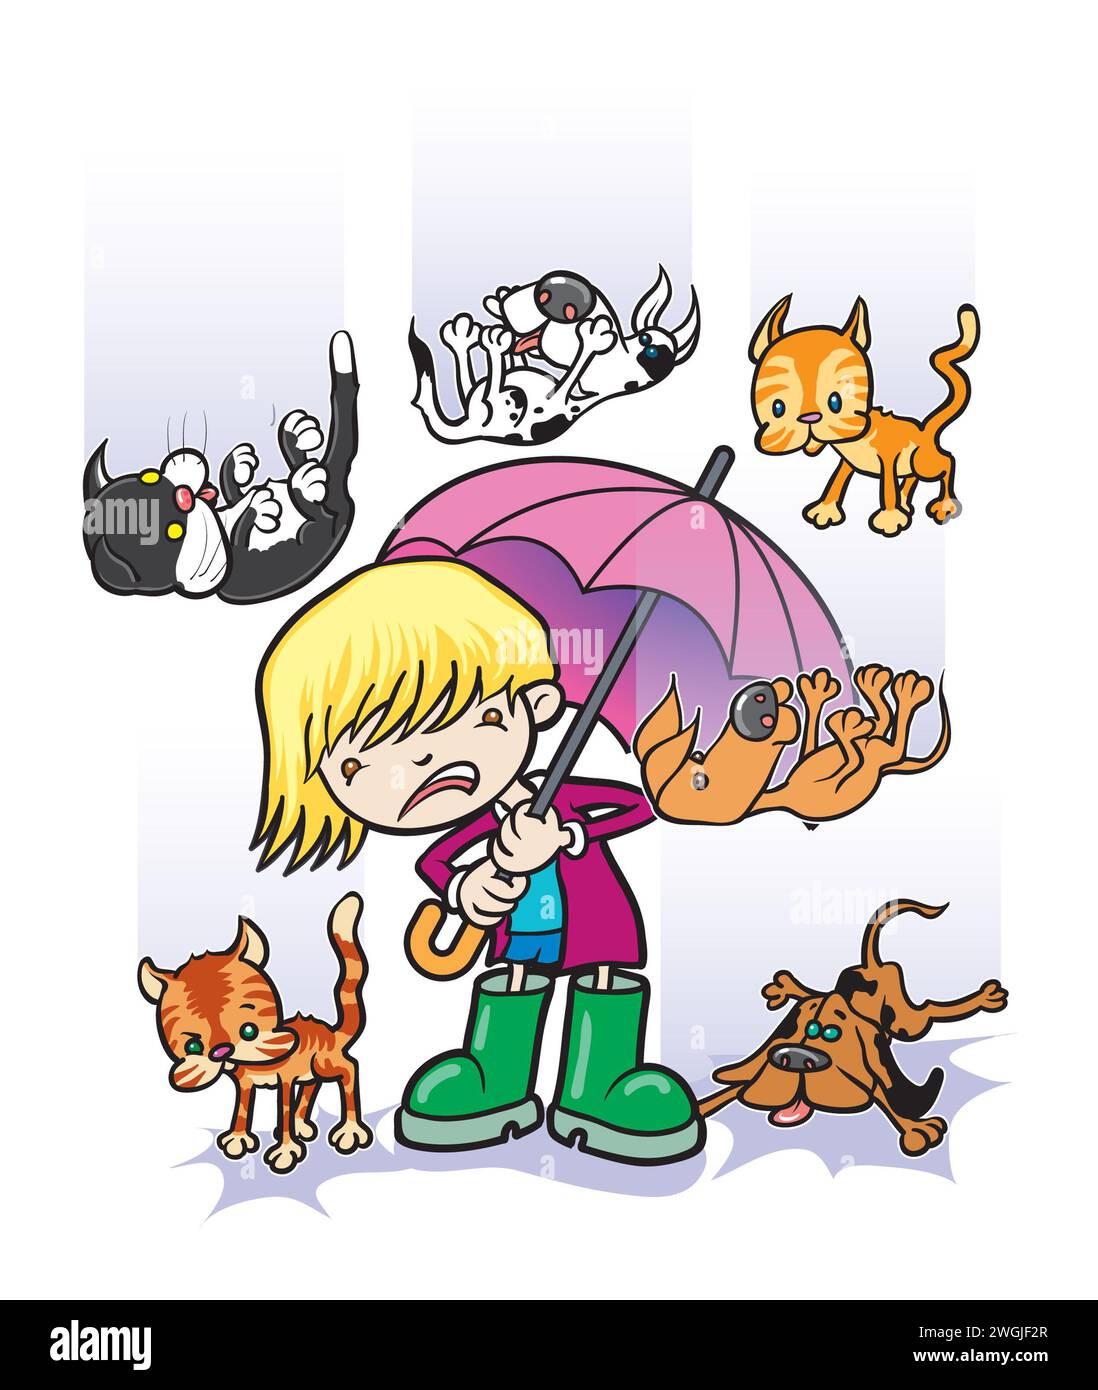 Concept art cartoon, child sheltering under umbrella from raining cats and dogs, popular phrases, idioms, English language popular sayings educational Stock Photo